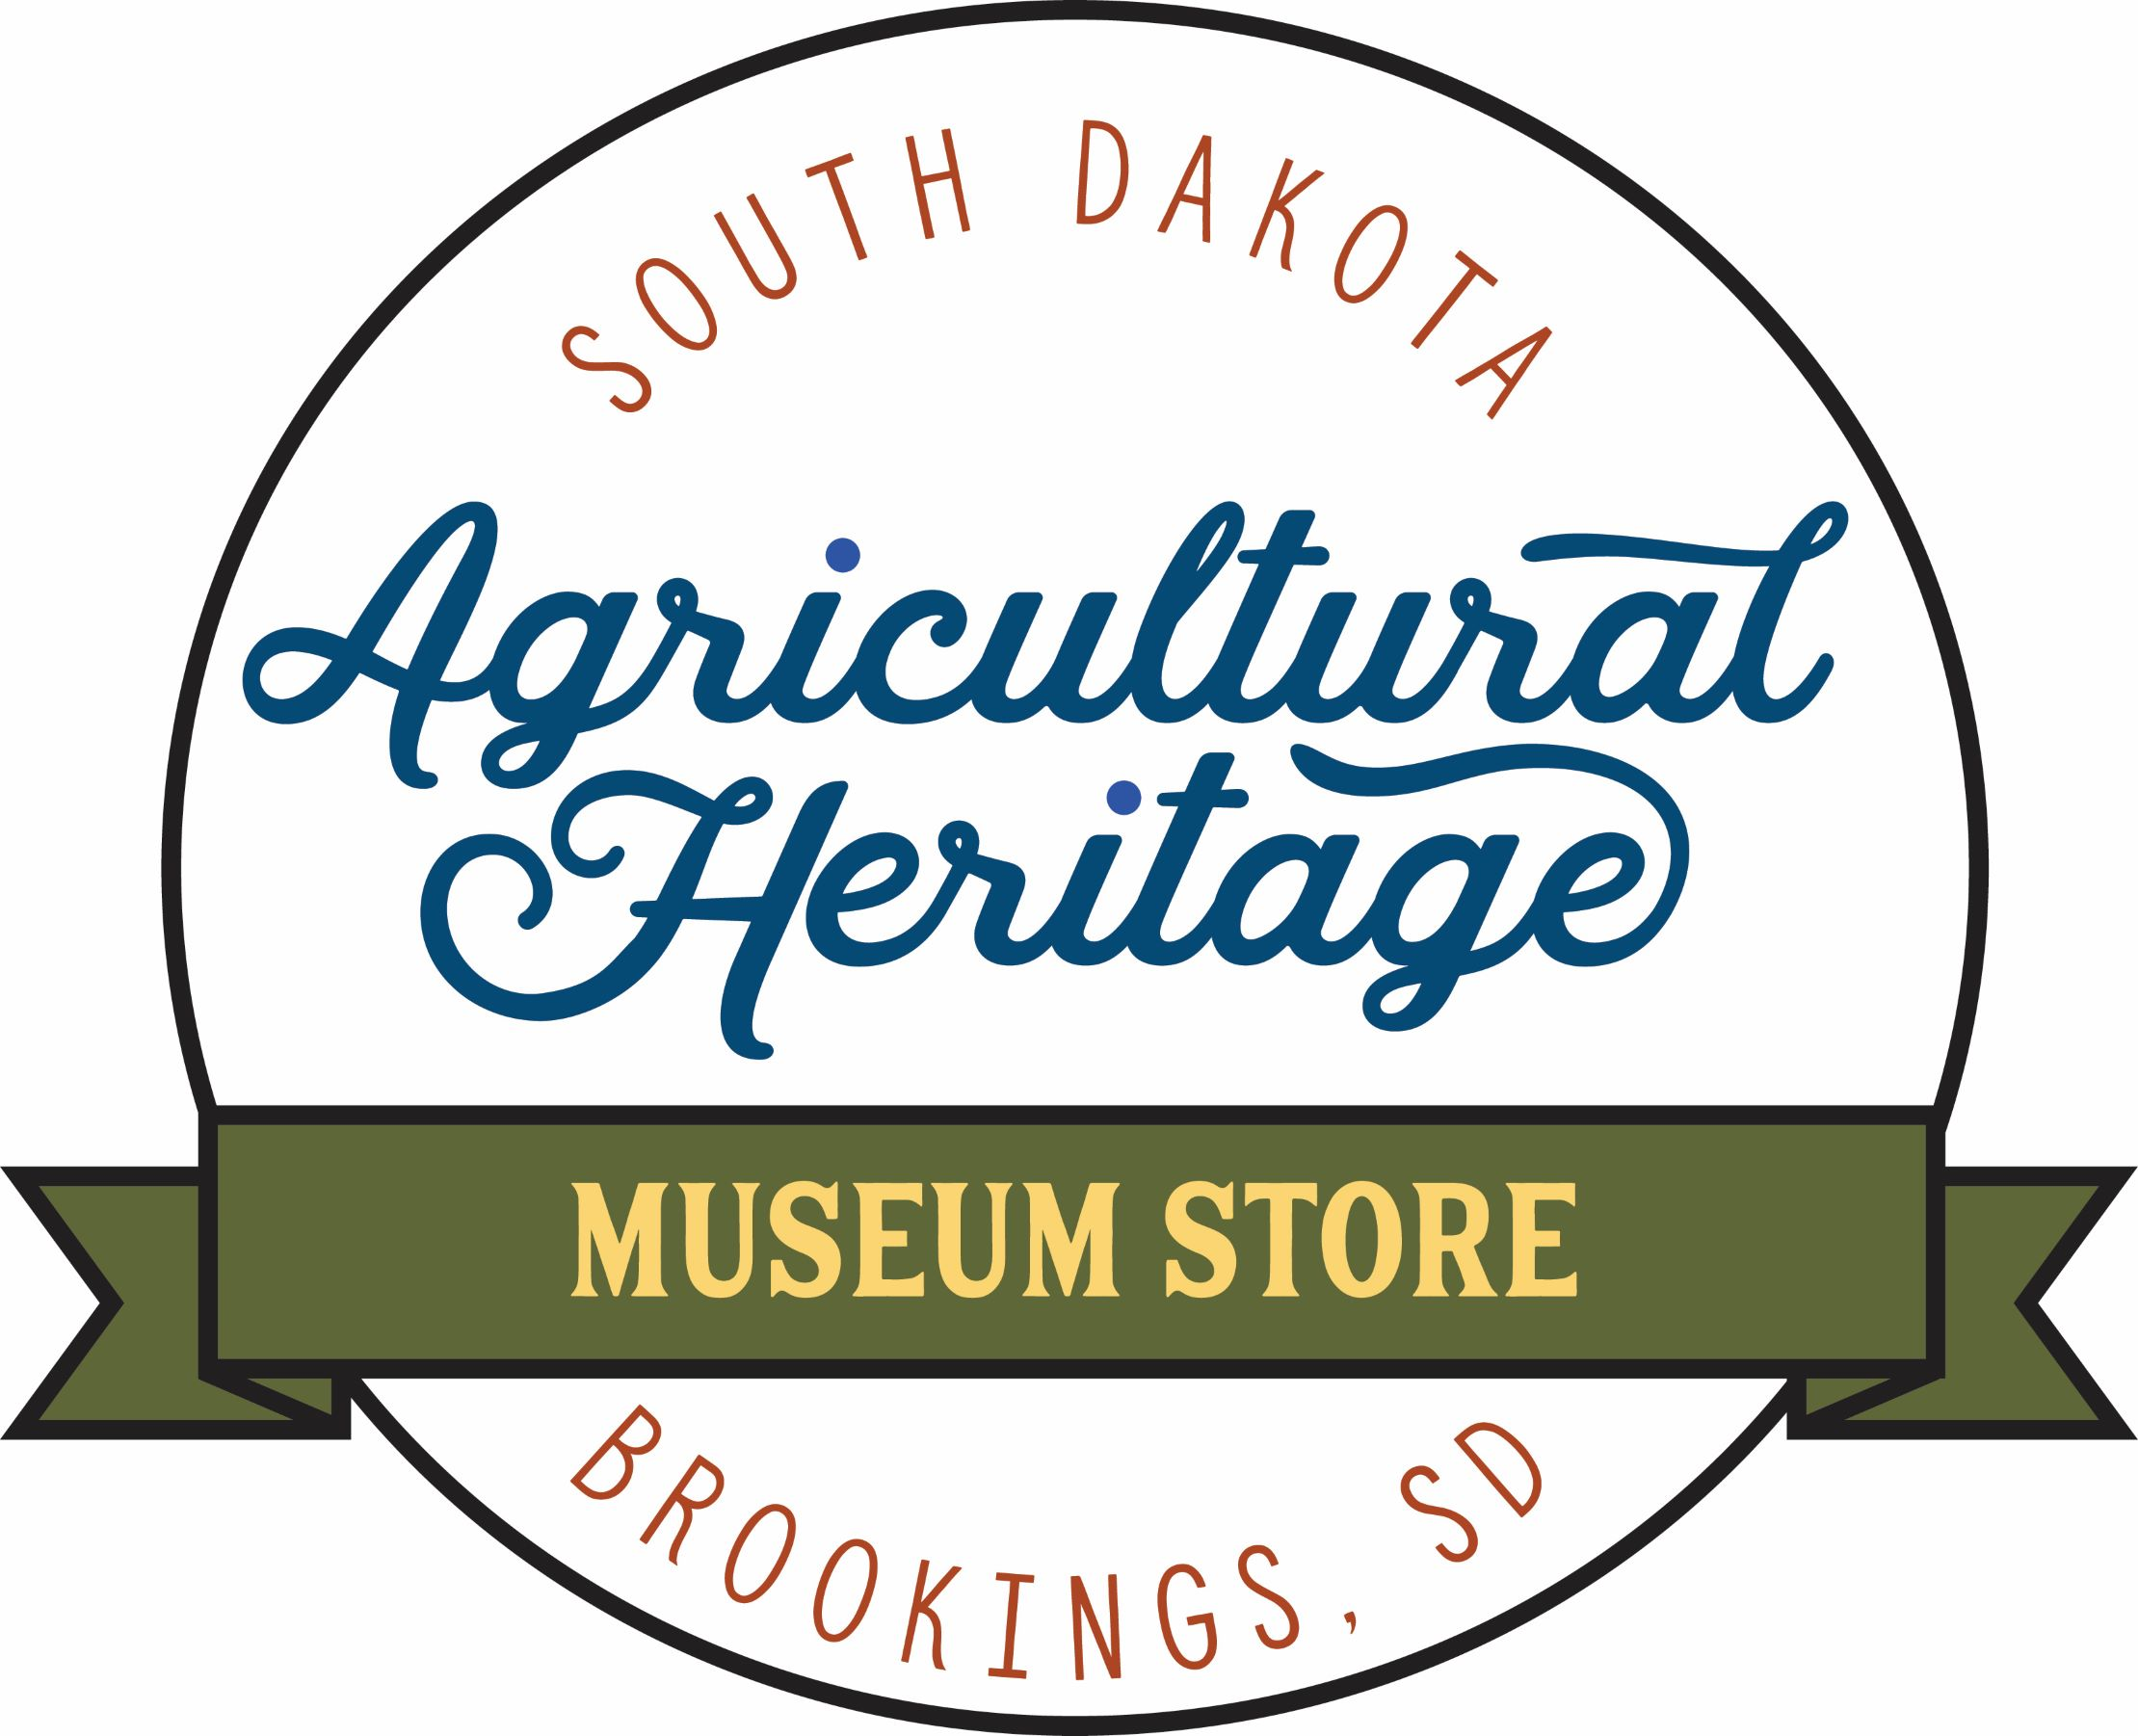 Specializing in South Dakota Made items that Capture the Spirit of South Dakota in every Gift!